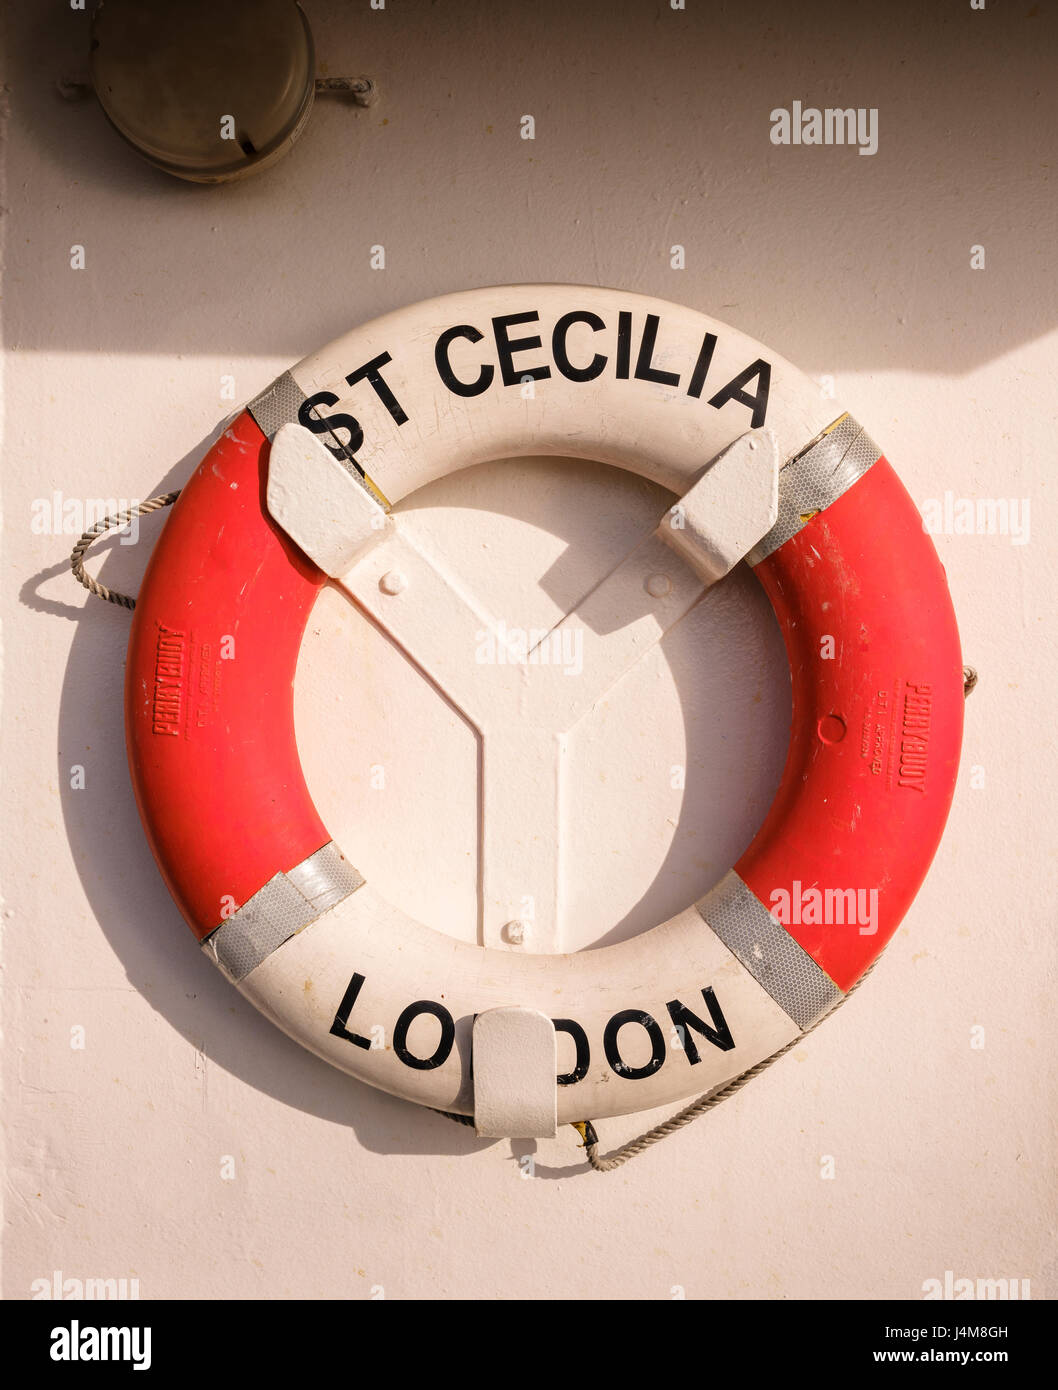 Life preserver on a Wightlink ferry named St Cecilia on the Portsmouth to Fishbourne route 2017. Stock Photo